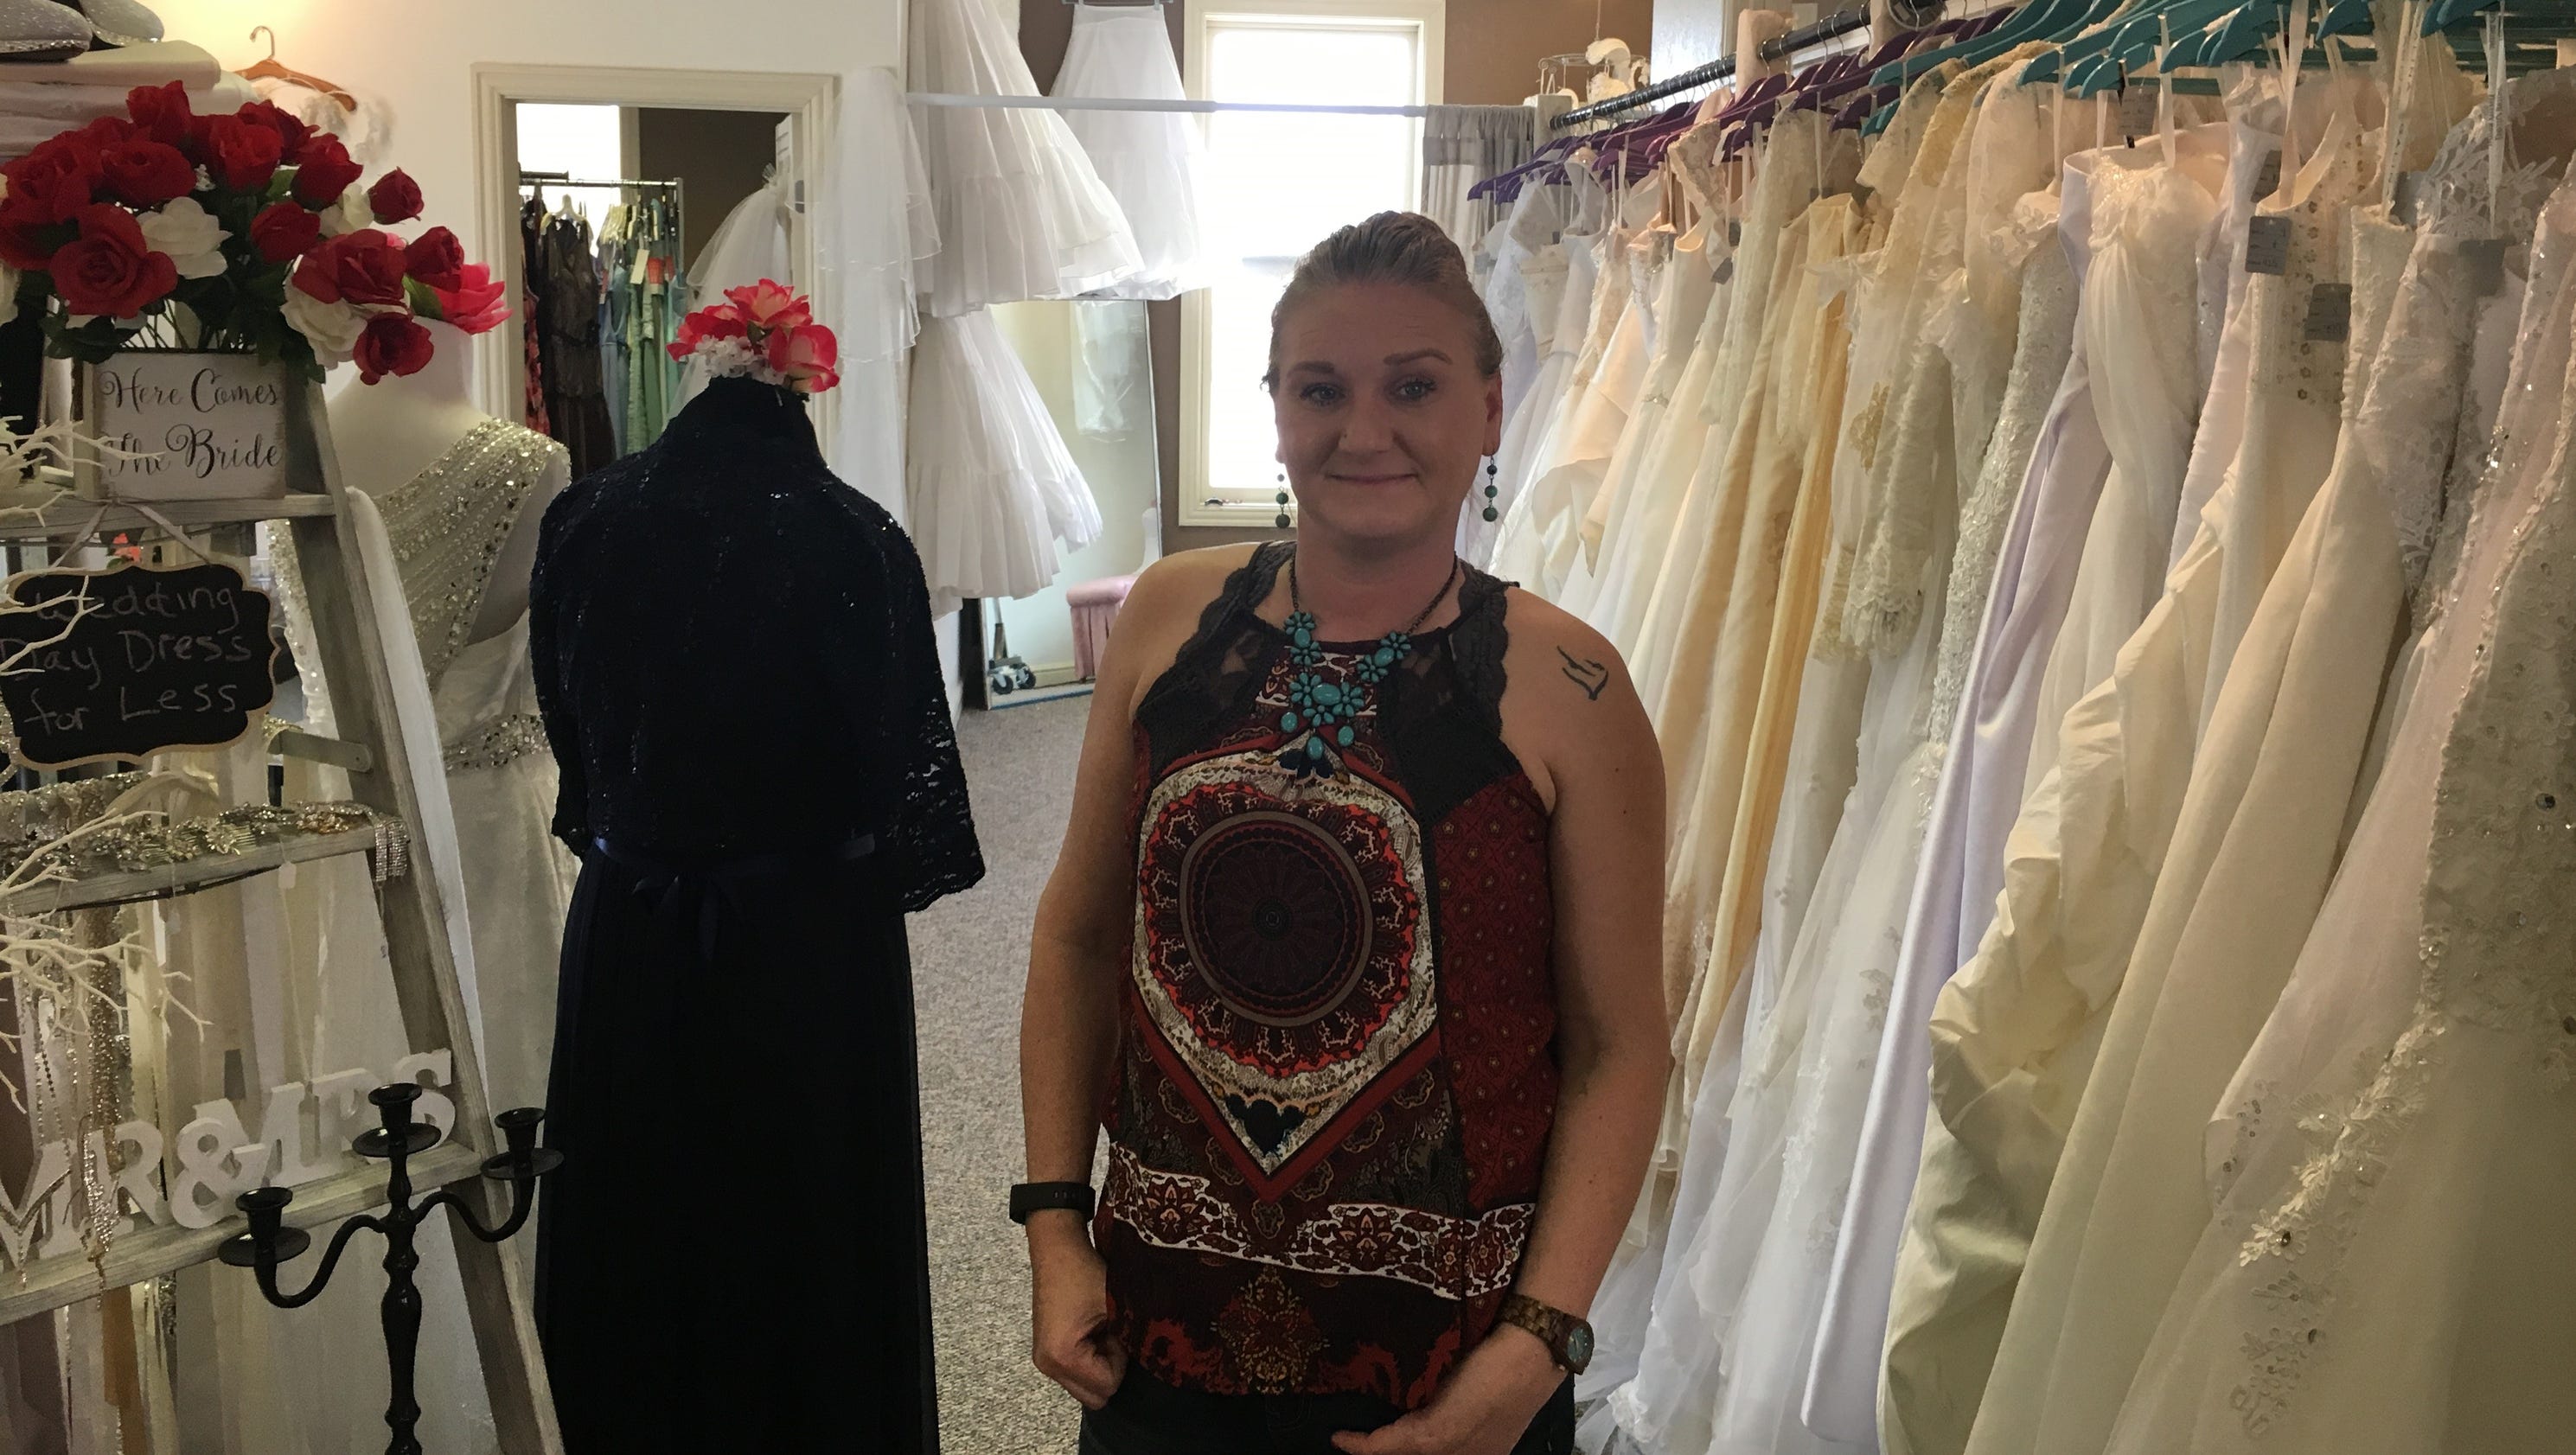  Green  Bay  wedding  shop  wants brides to look chic without 